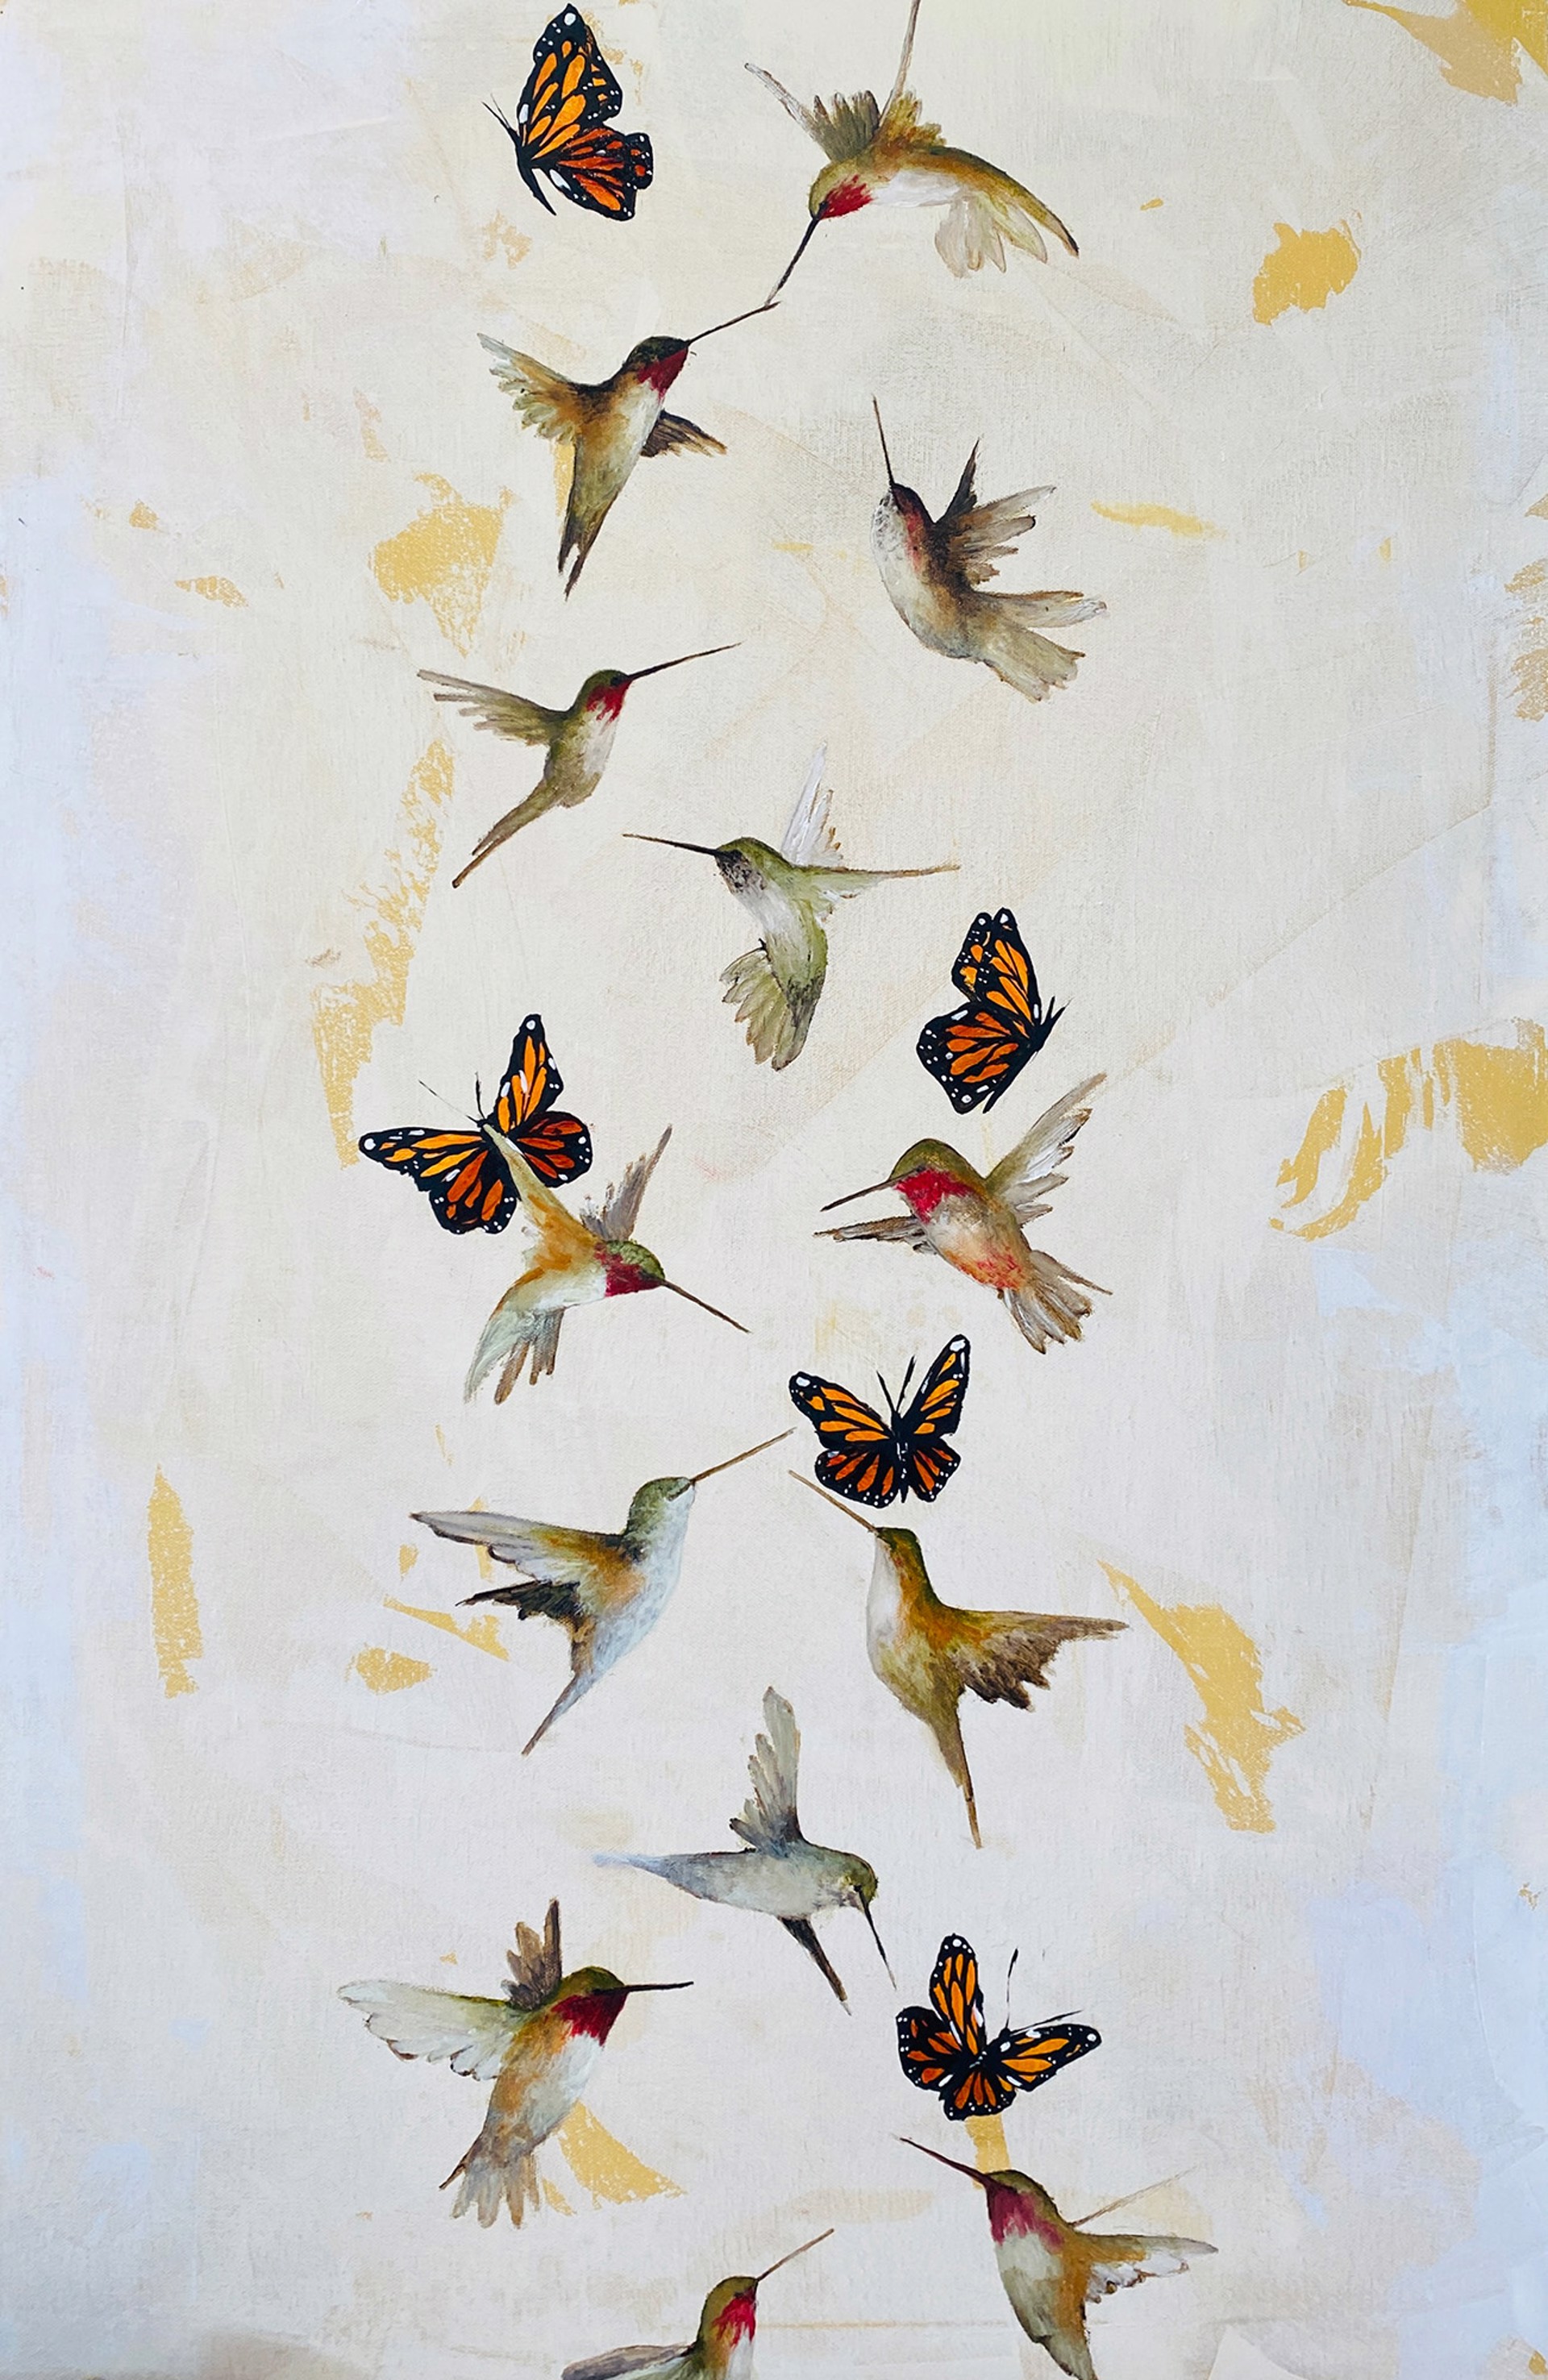 Original Oil Painting By Jenna Von Benedikt With Hummingbirds And Butterflies On An Abstract Background